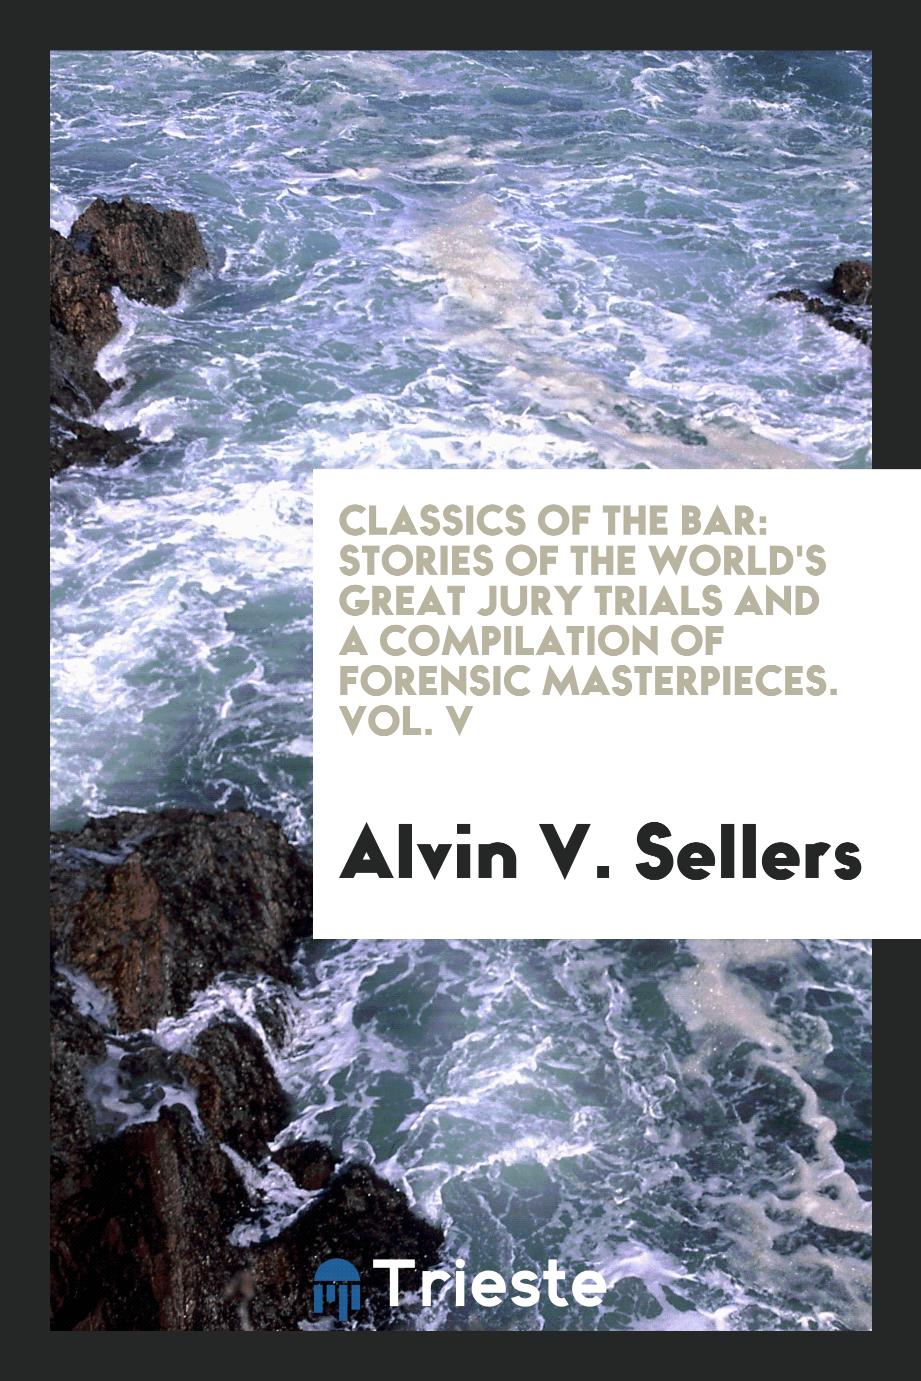 Classics of the Bar: Stories of the World's Great Jury Trials and a Compilation of Forensic Masterpieces. Vol. V